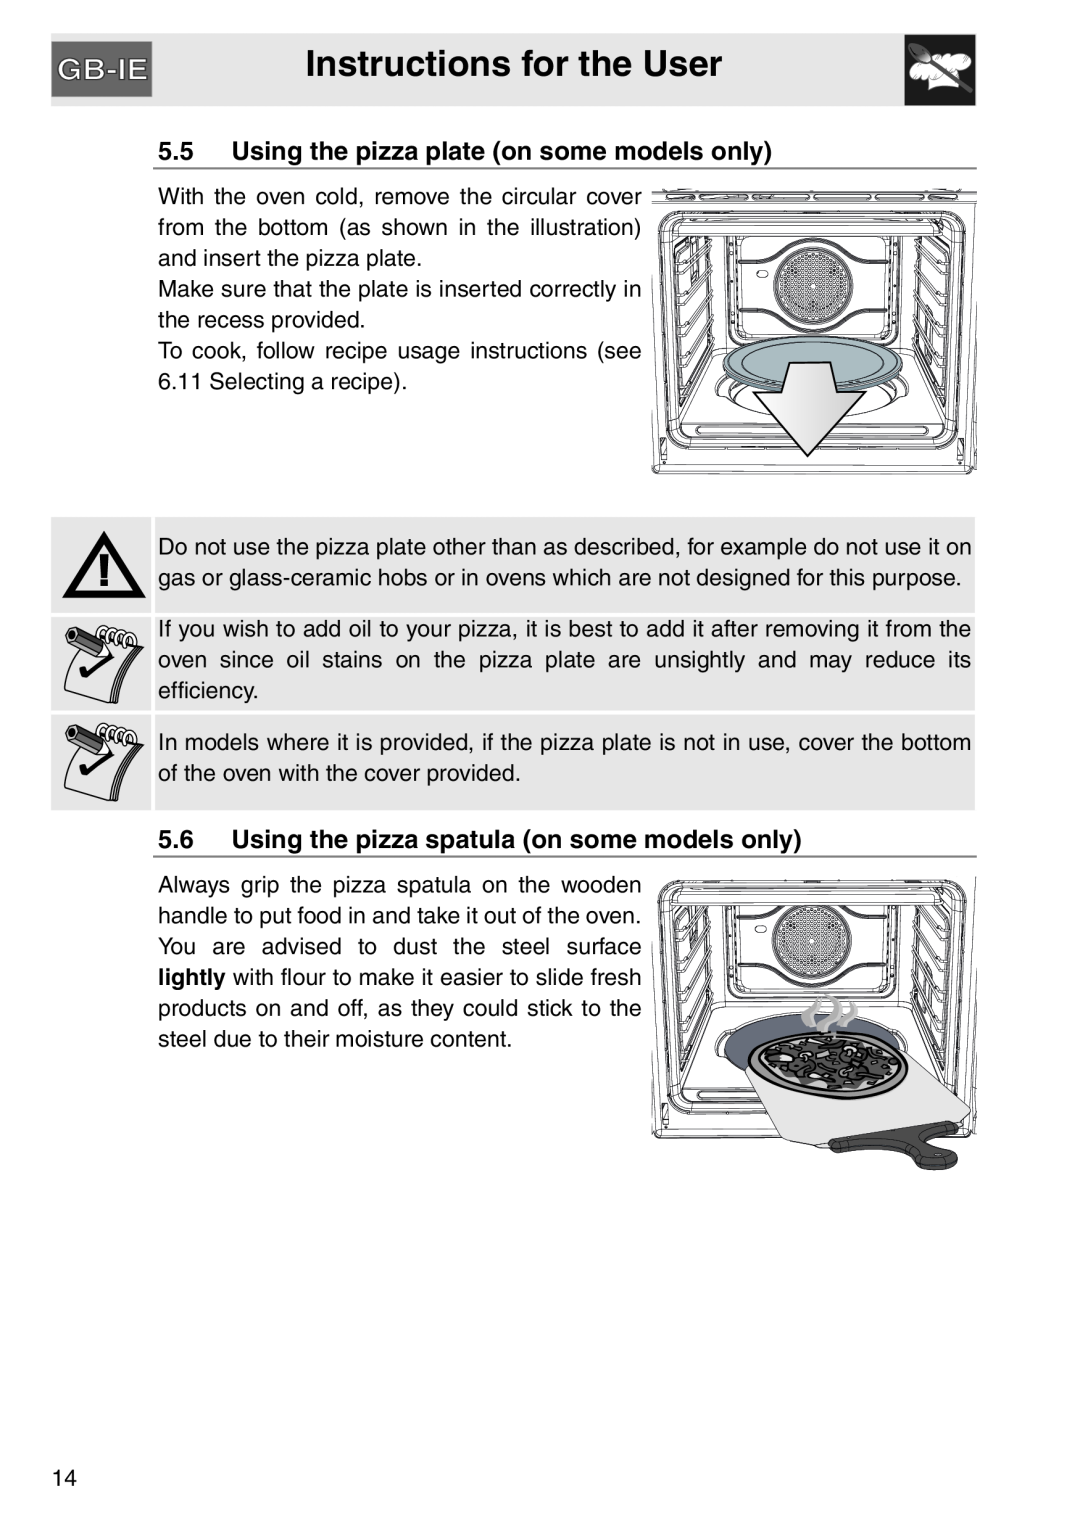 Smeg SAP112-8 manual Instructions for the User, 5.5Using the pizza plate on some models only 